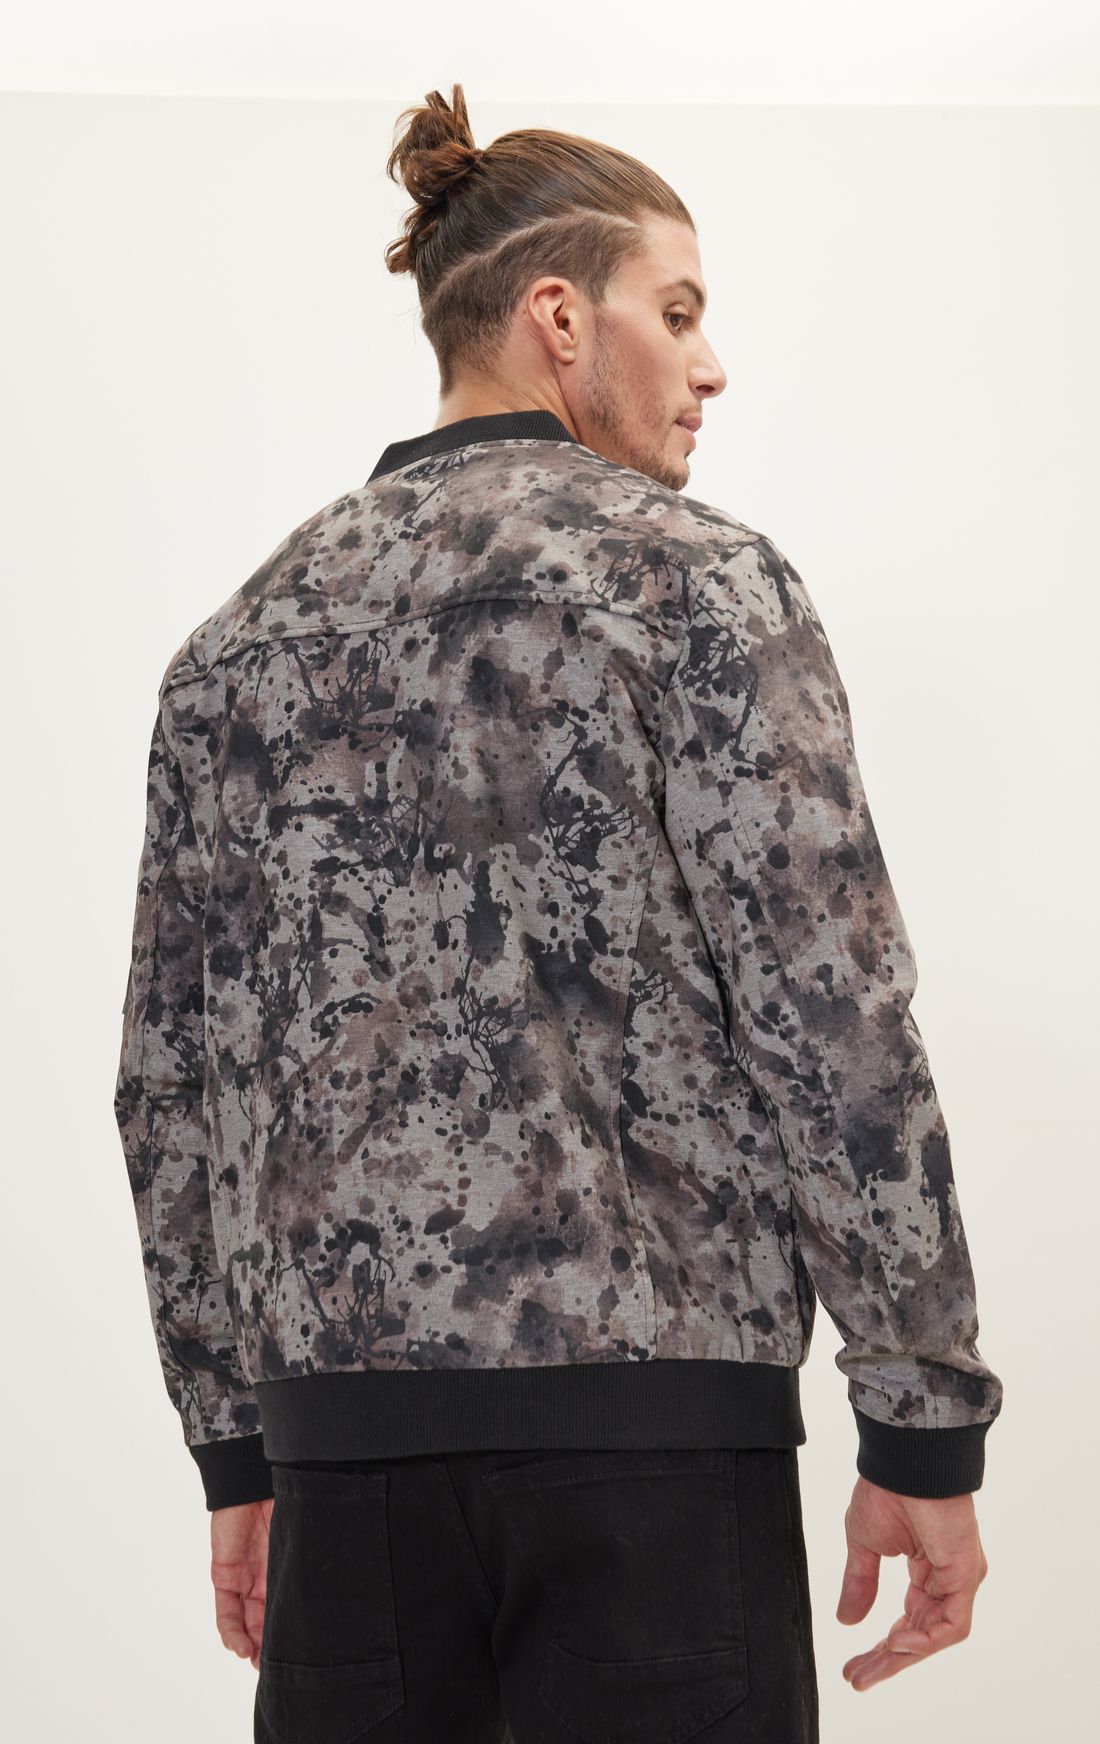 N° 71305 BOMBER ABSTRAIT - CAMOUFLAGE